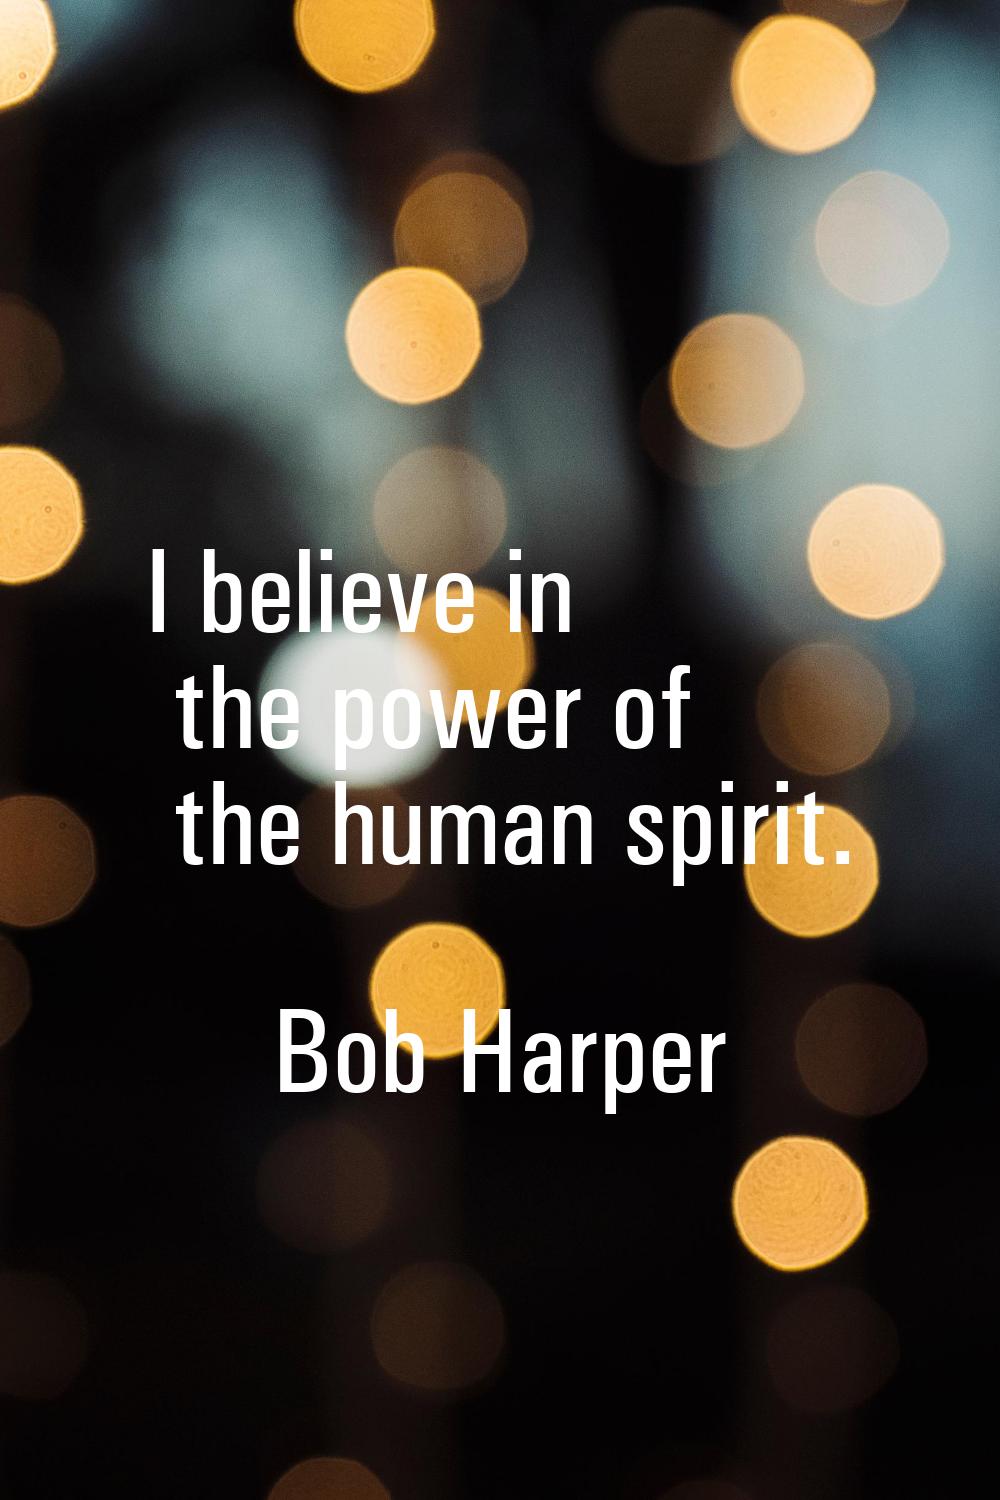 I believe in the power of the human spirit.